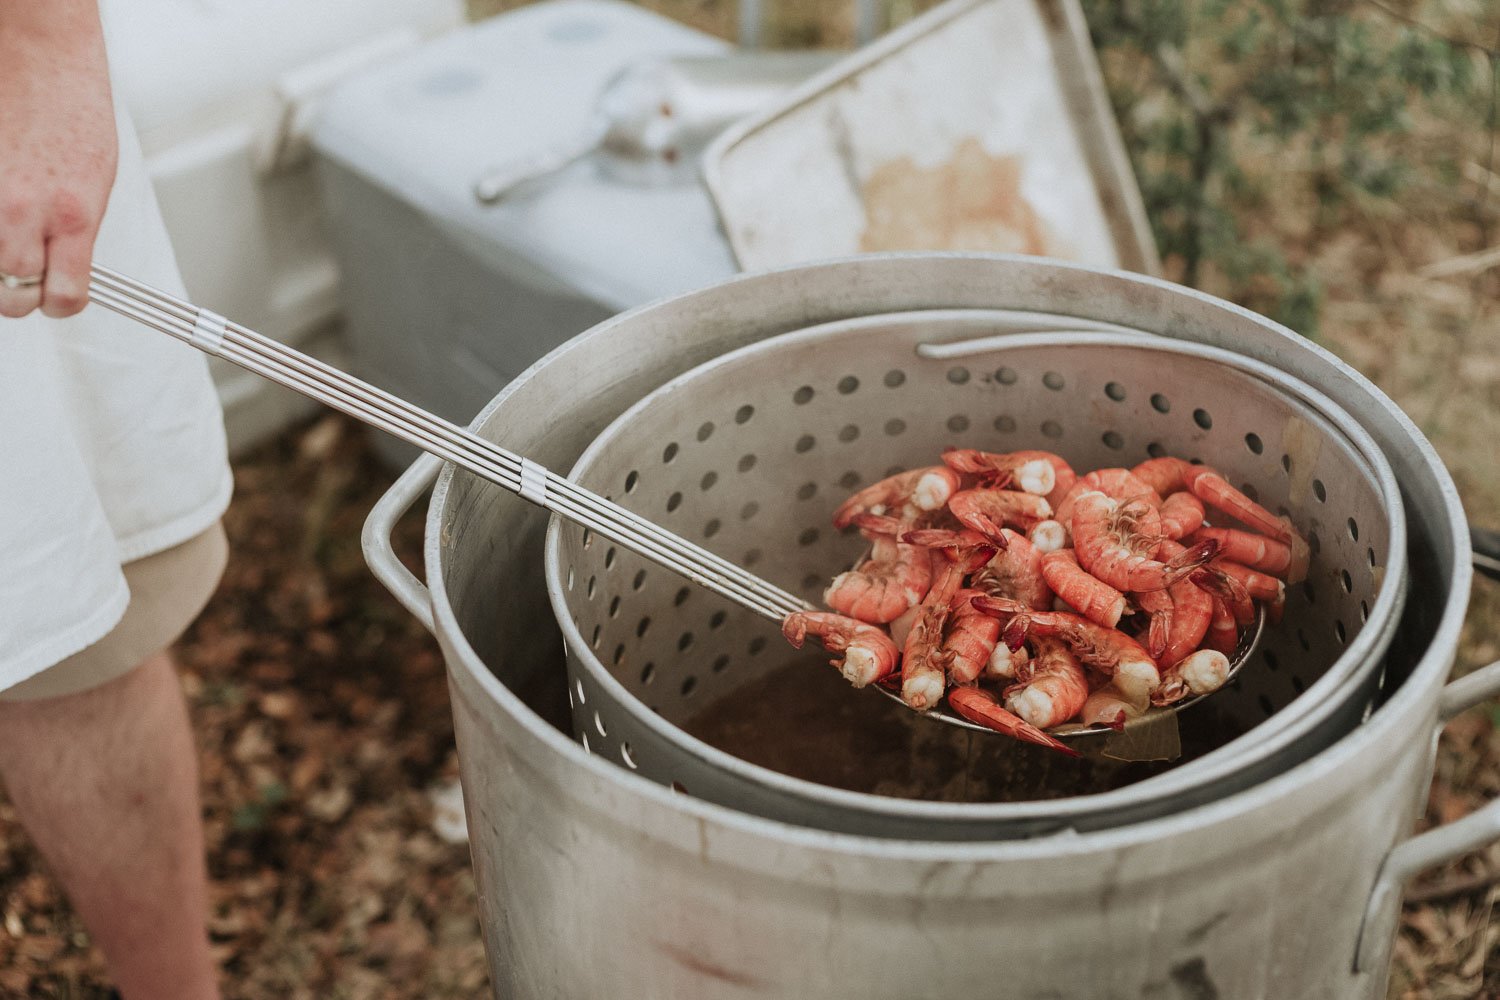 Shrimp boil at a wedding rehearsal in the hill country, Texas